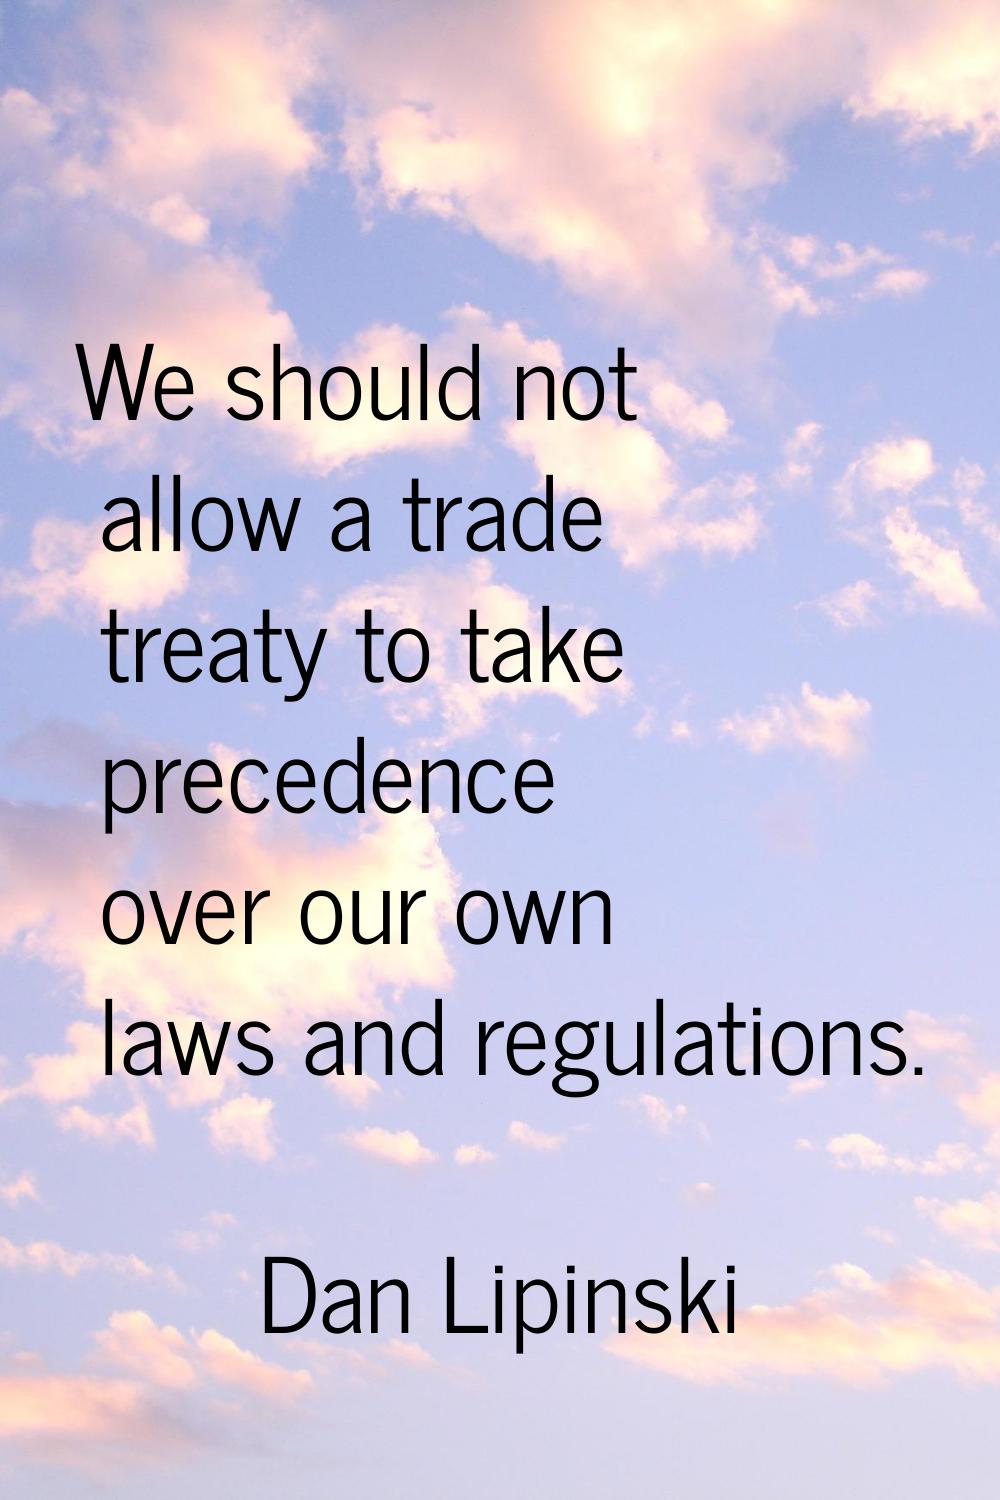 We should not allow a trade treaty to take precedence over our own laws and regulations.